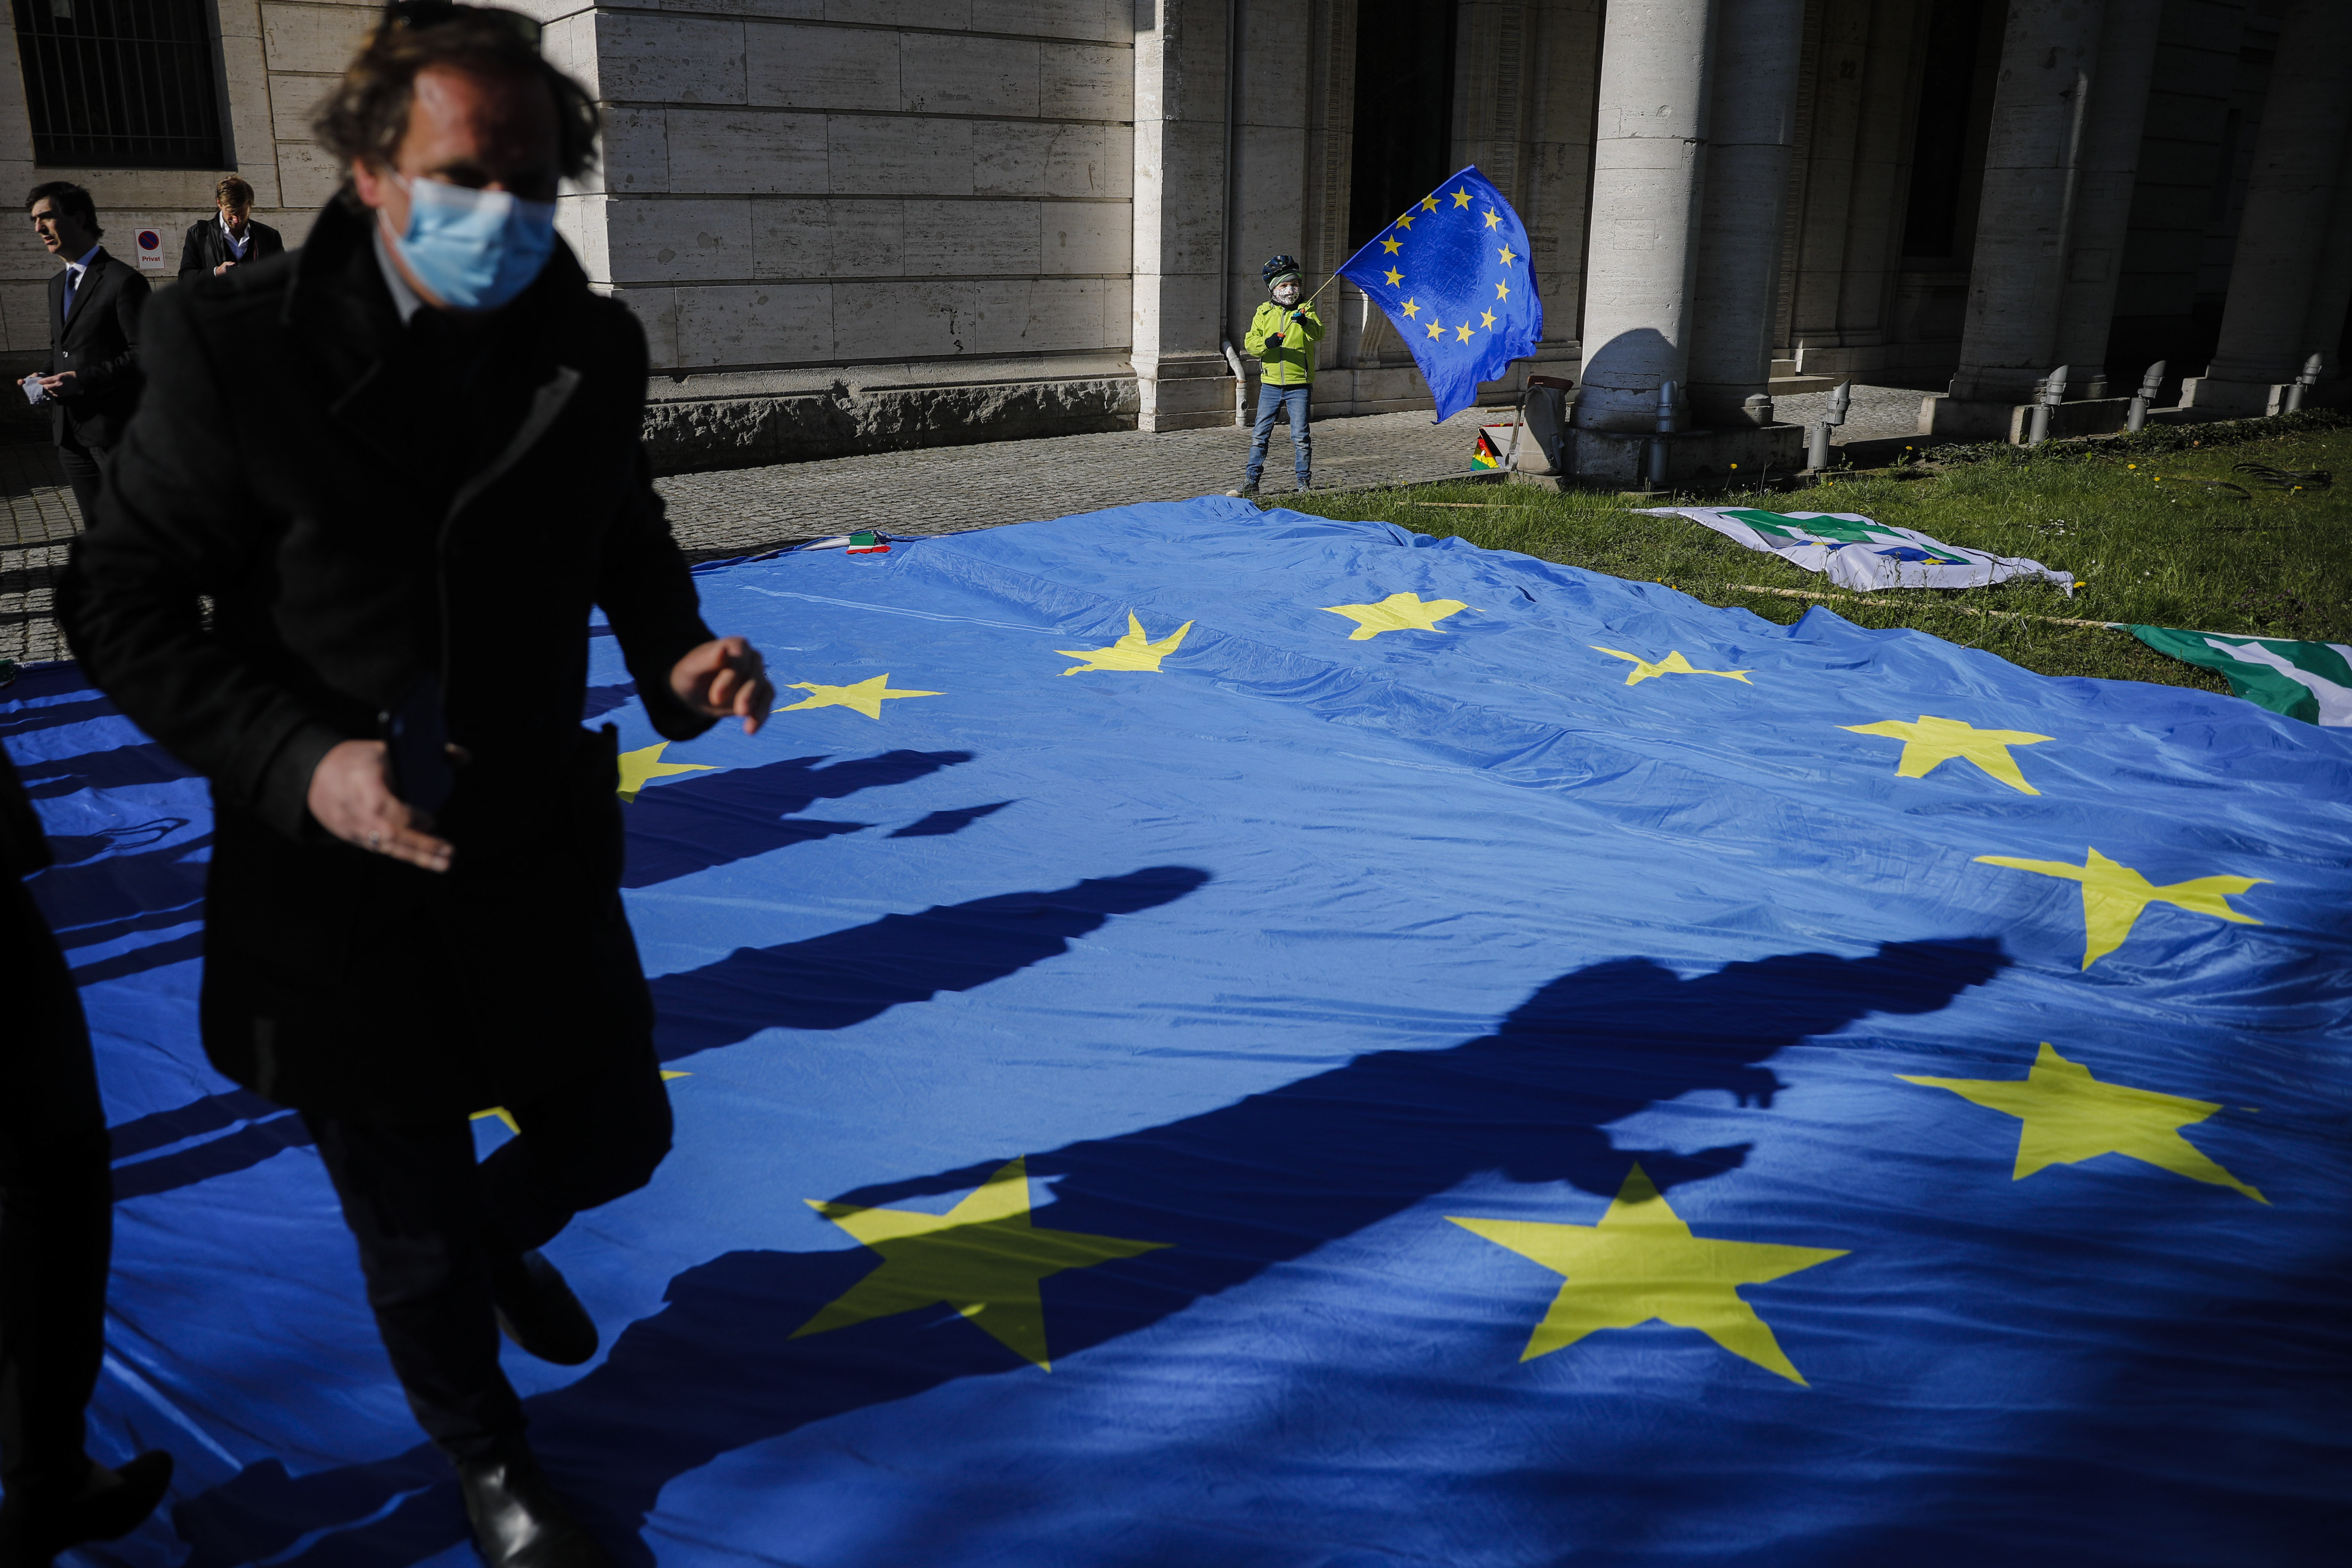 A man with a face mask and a child with an European flag attend an event of the Pulse of Europe movement to collecting signatures for more support for Italy during the coronavirus and the COVID-19 outbreak in front of the Italian embassy in Berlin, Germany, Wednesday, April 22, 2020. (AP Photo/Markus Schreiber)